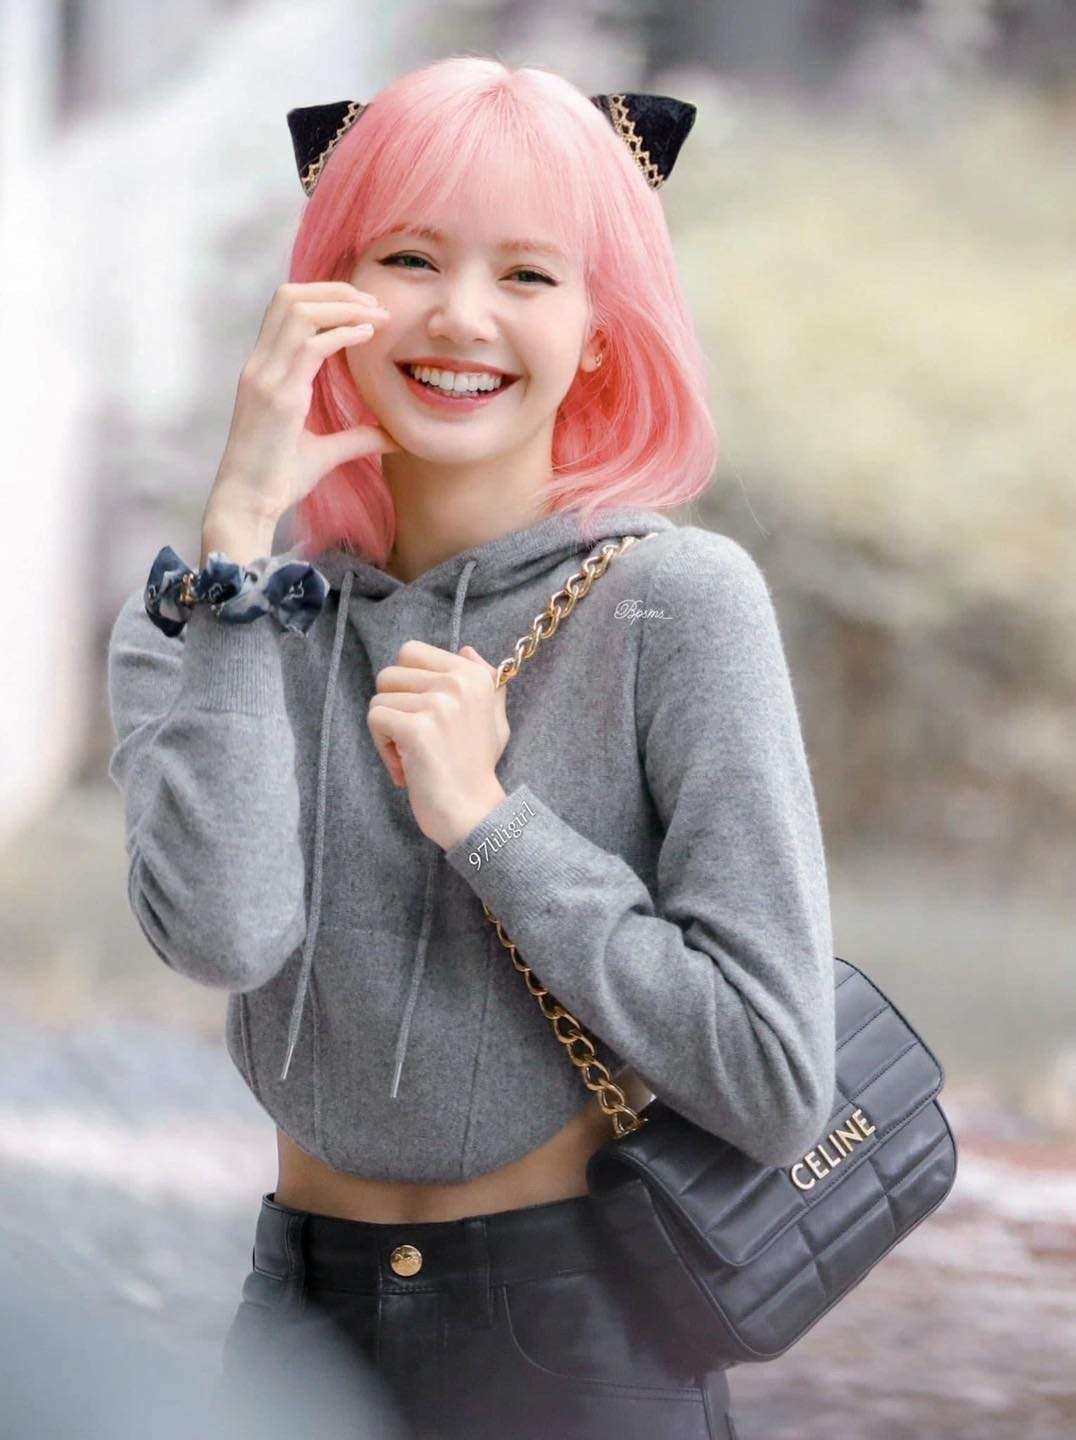 The bright smile that creates the brand for Lisa.